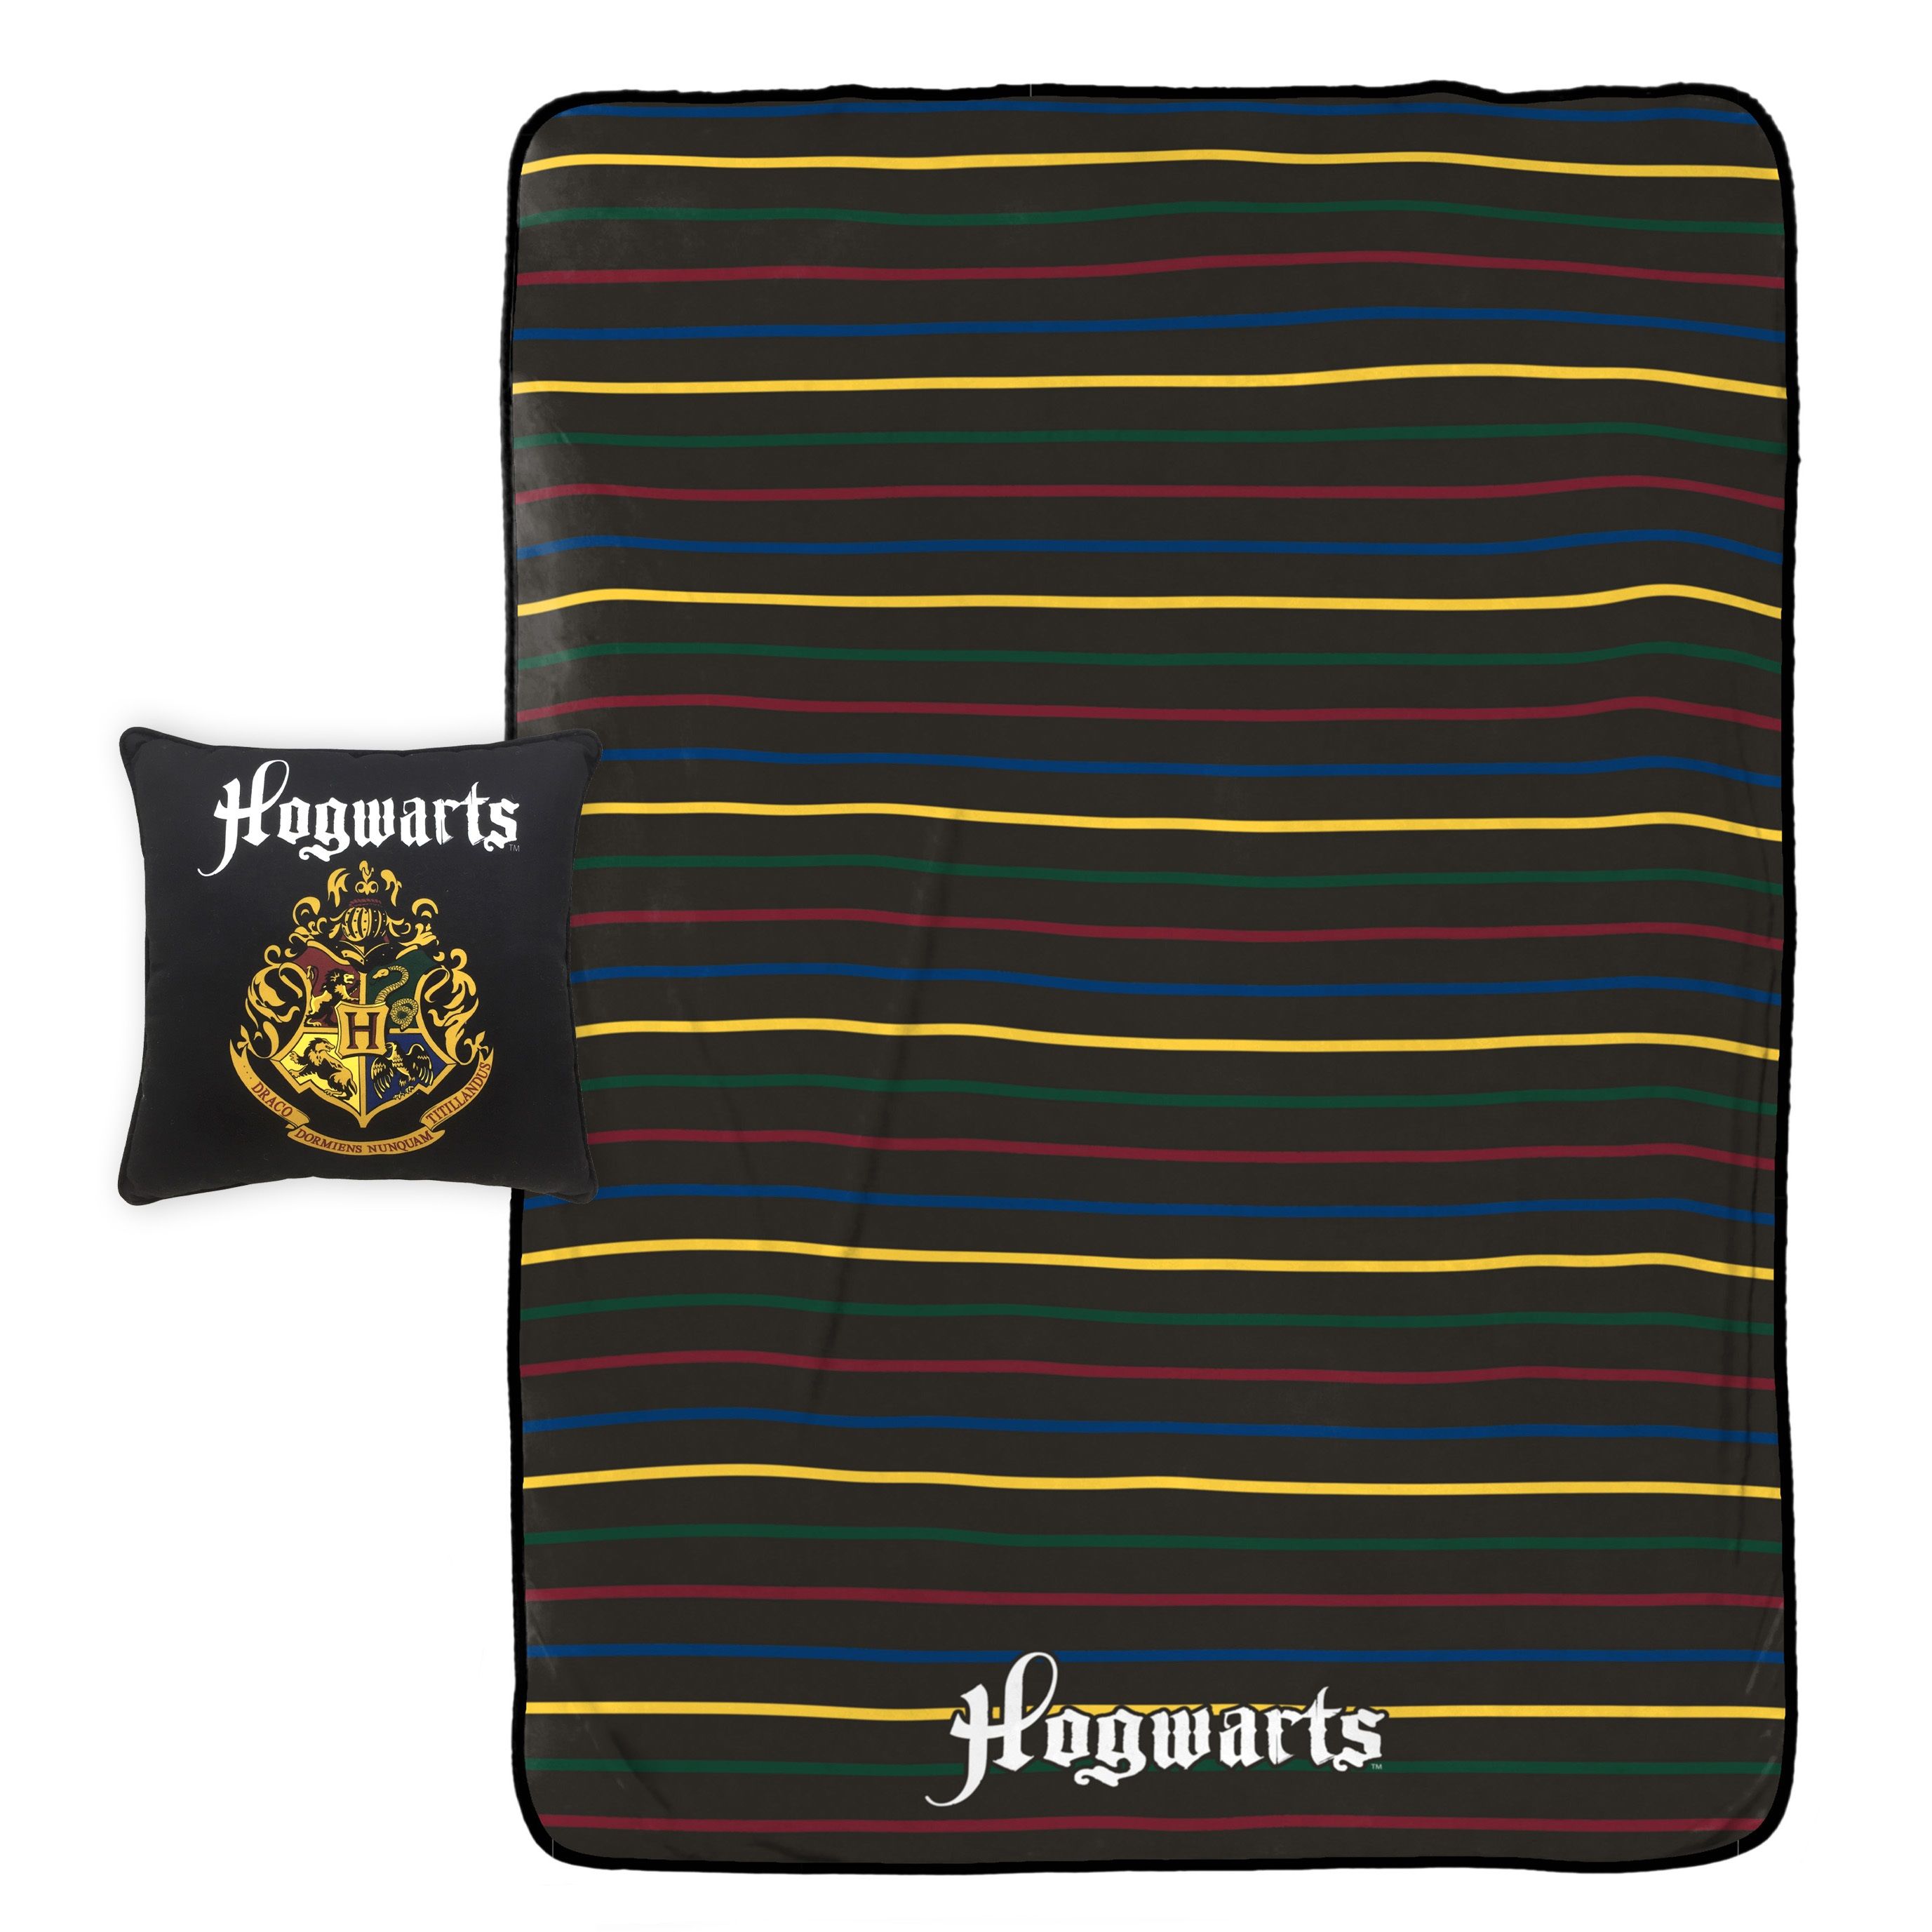 Harry Potter 'Hogwarts' 2 Piece Decorative Pillow and Blanket Set - image 1 of 5